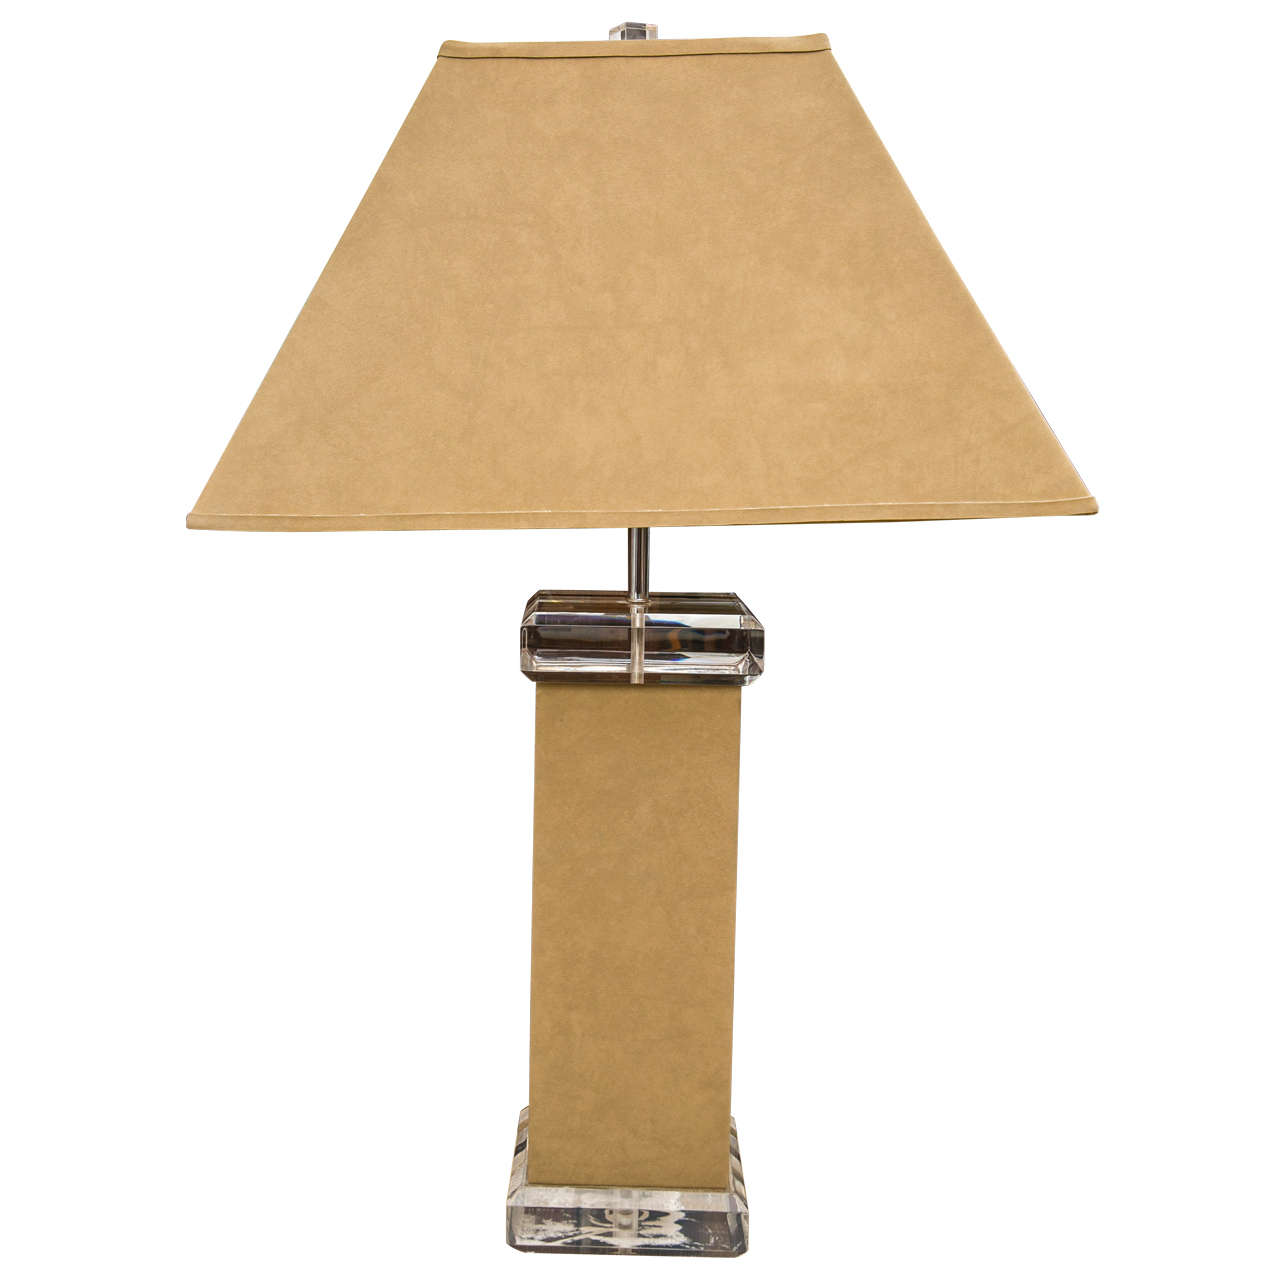 Vintage Italian Lucite & Suede Table Lamp For Sale